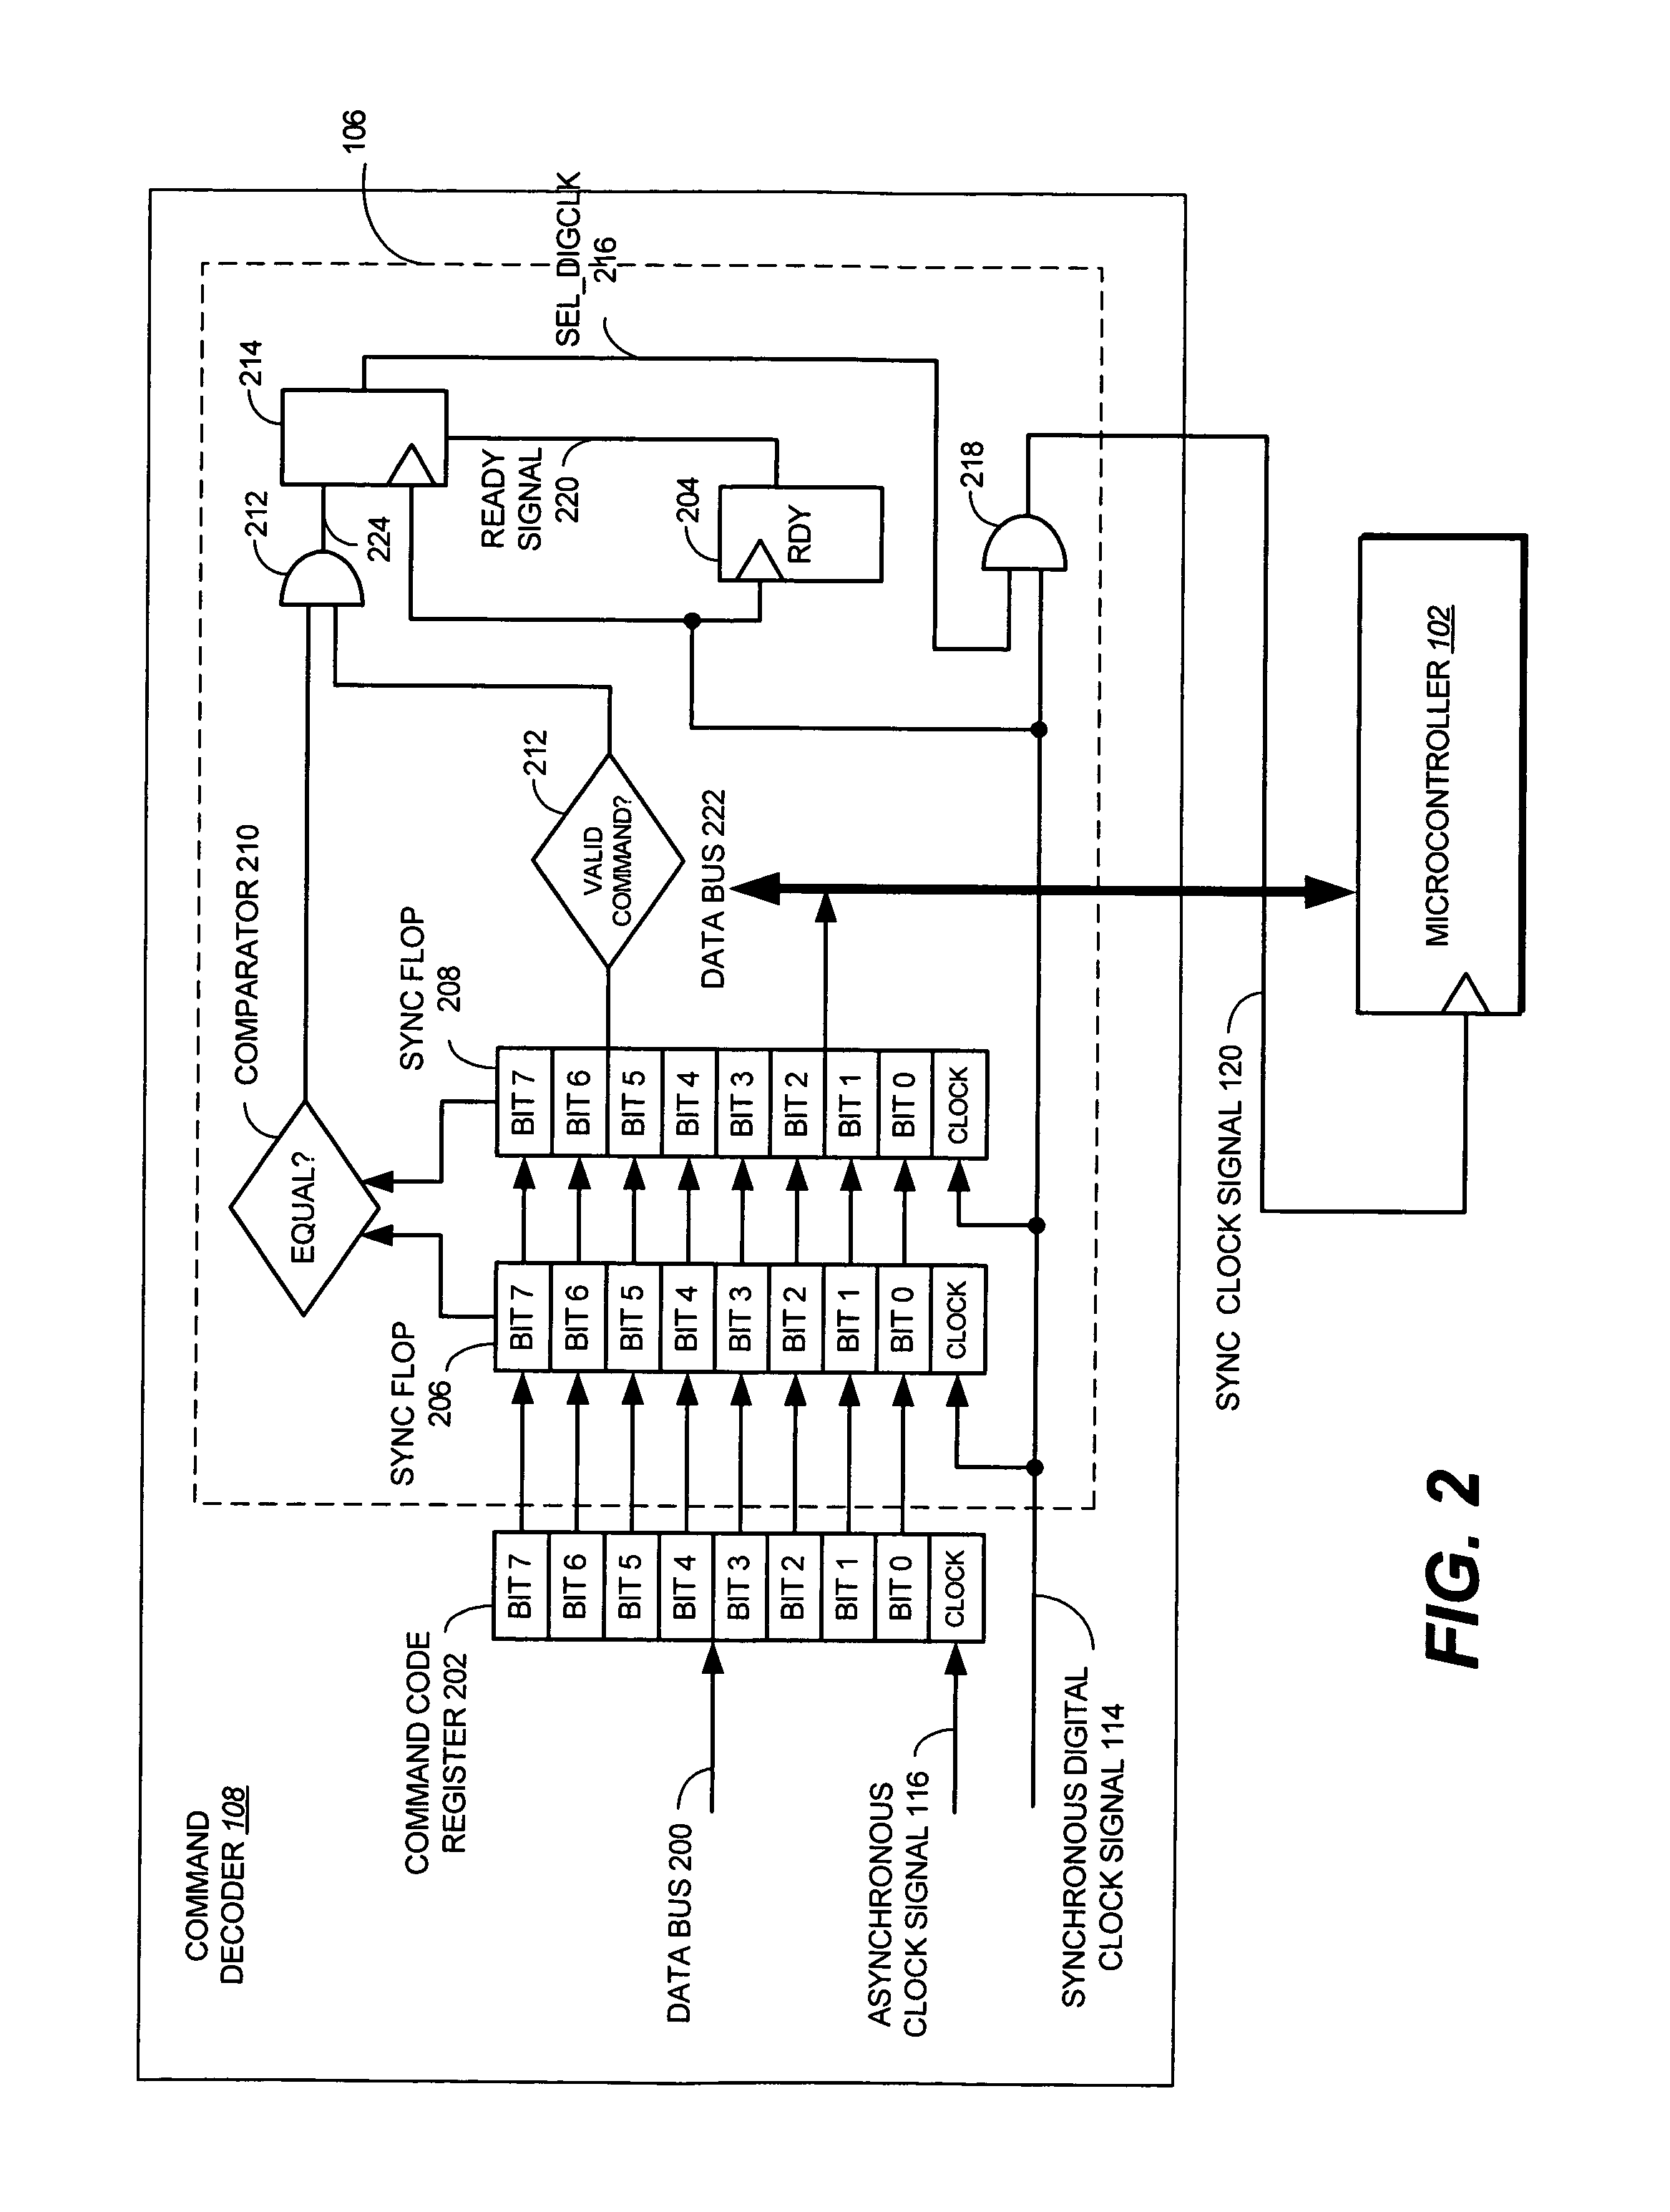 Method and apparatus for synchronizing data between different clock domains in a memory controller